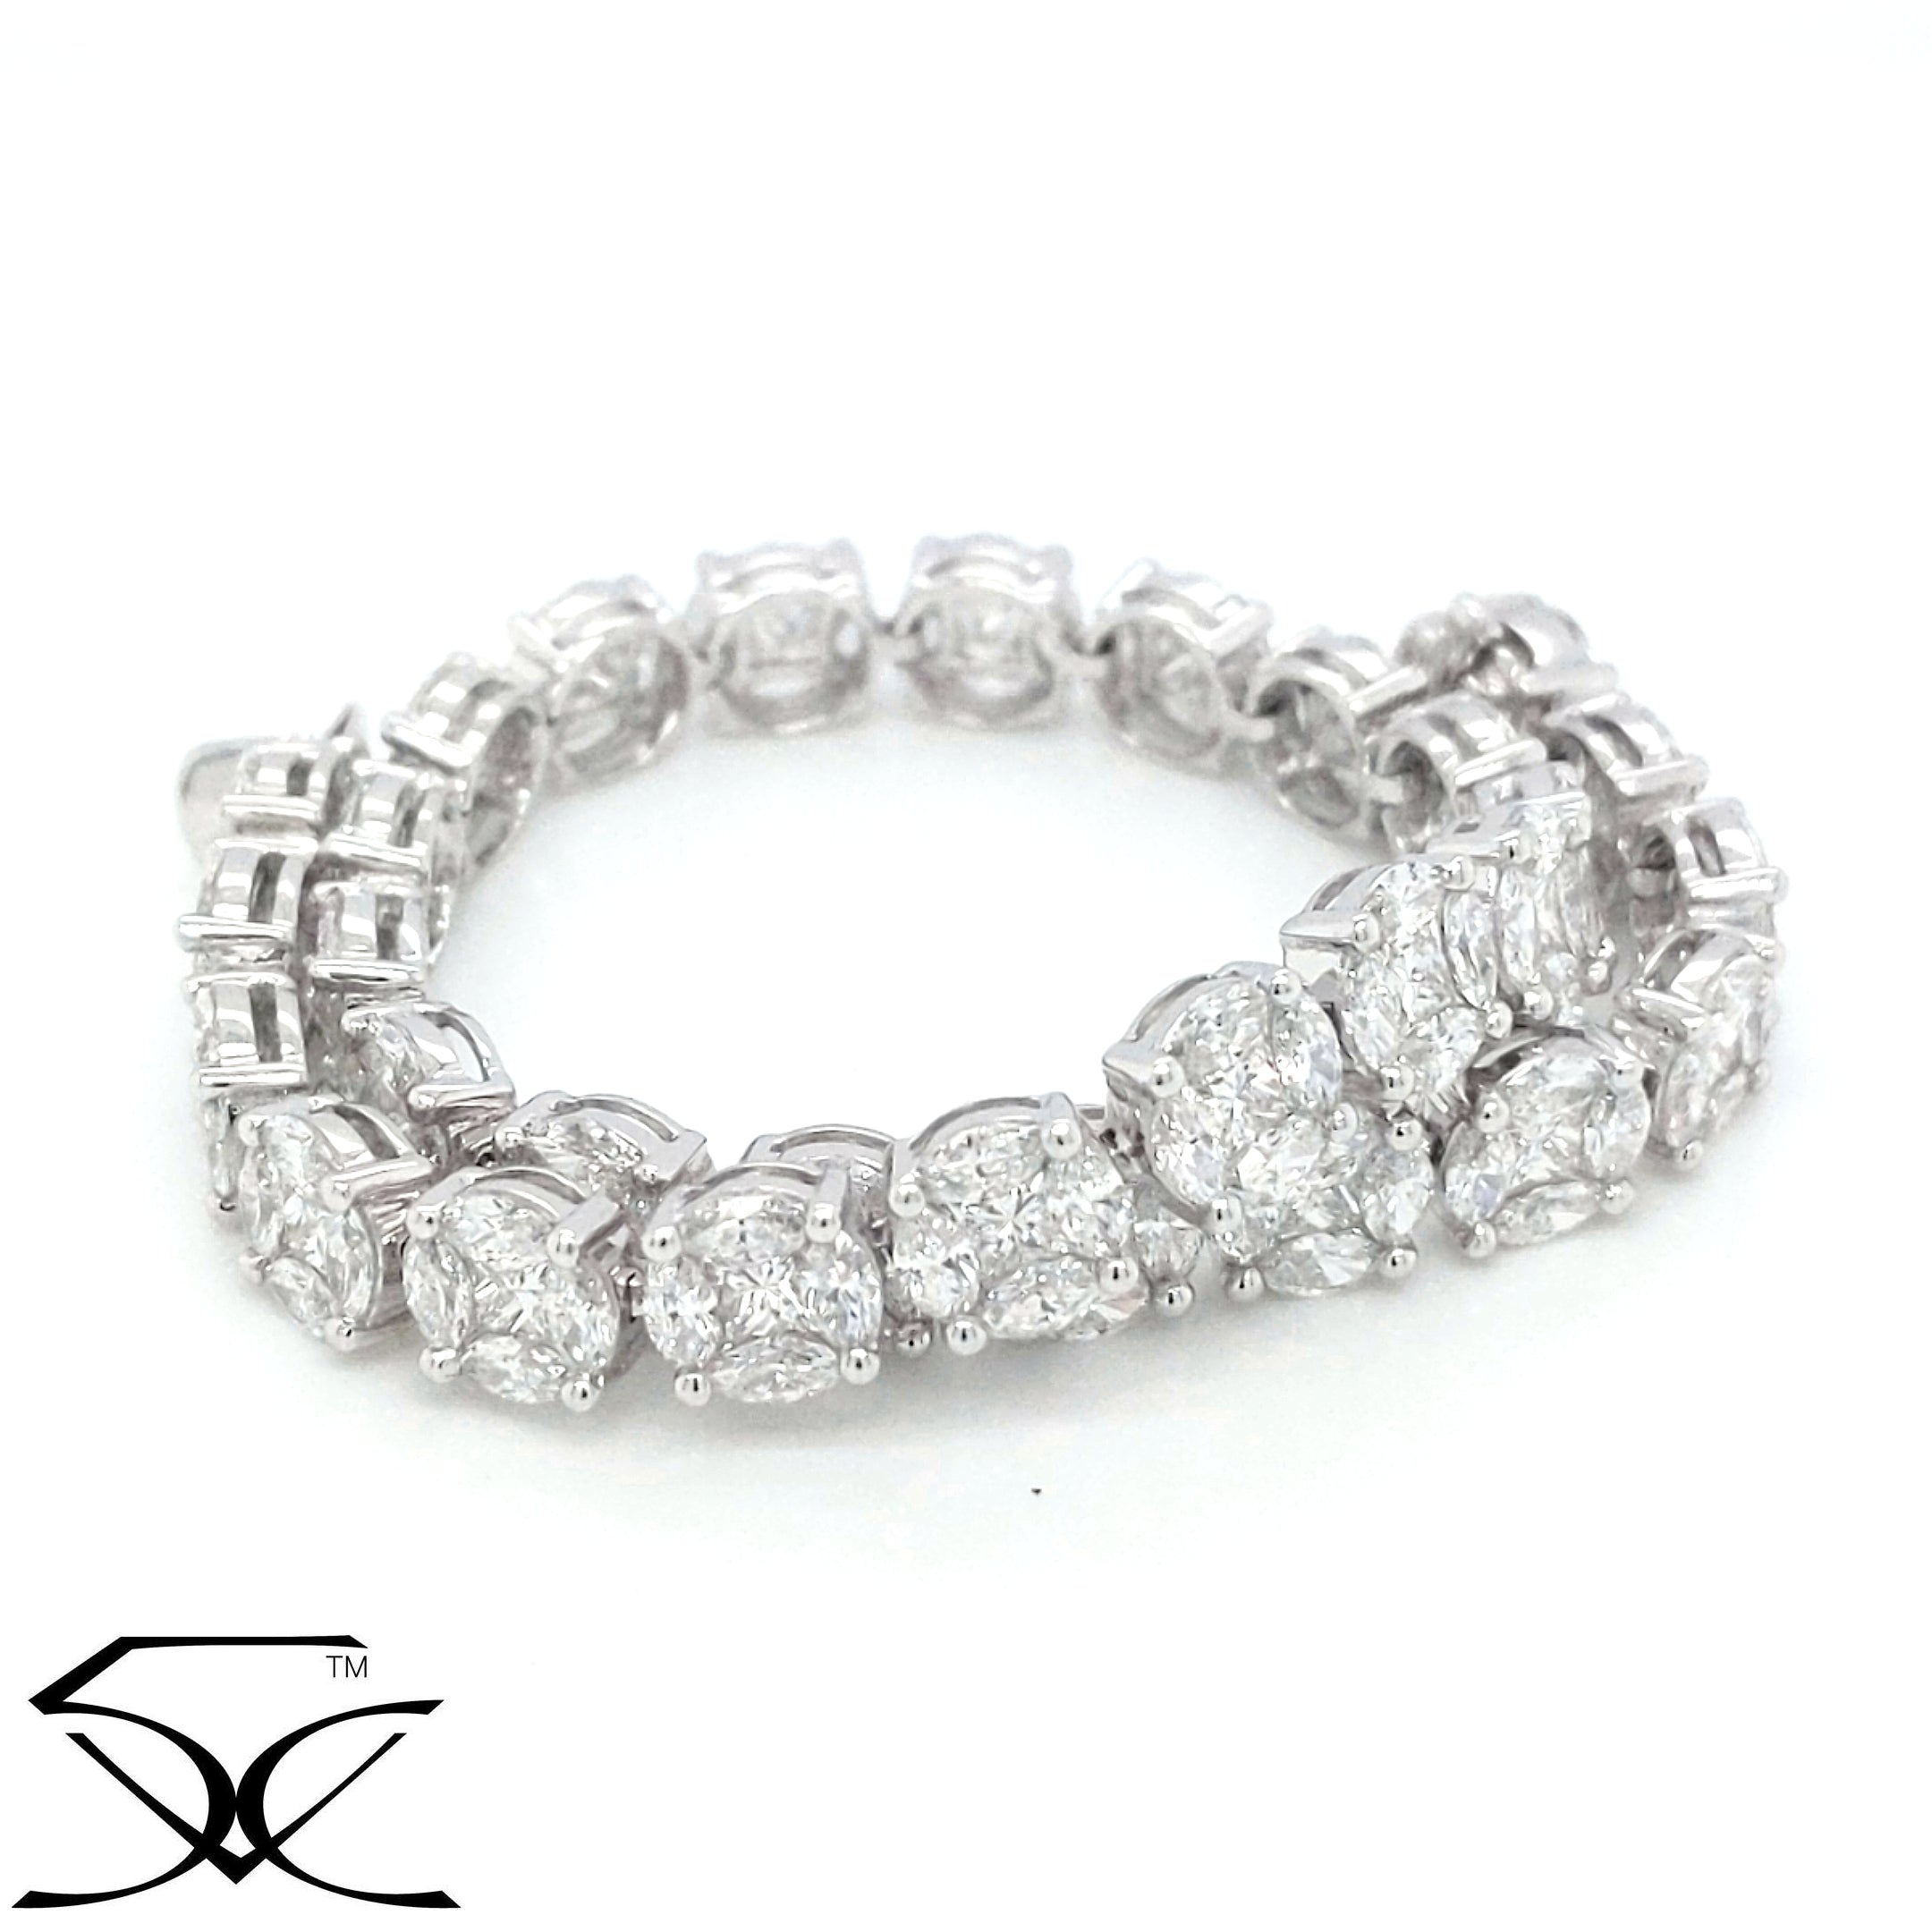 8.70 CT Natural Diamonds Tennis Bracelet in an Illusion Setting with Marquise and Princess in 18K White Gold